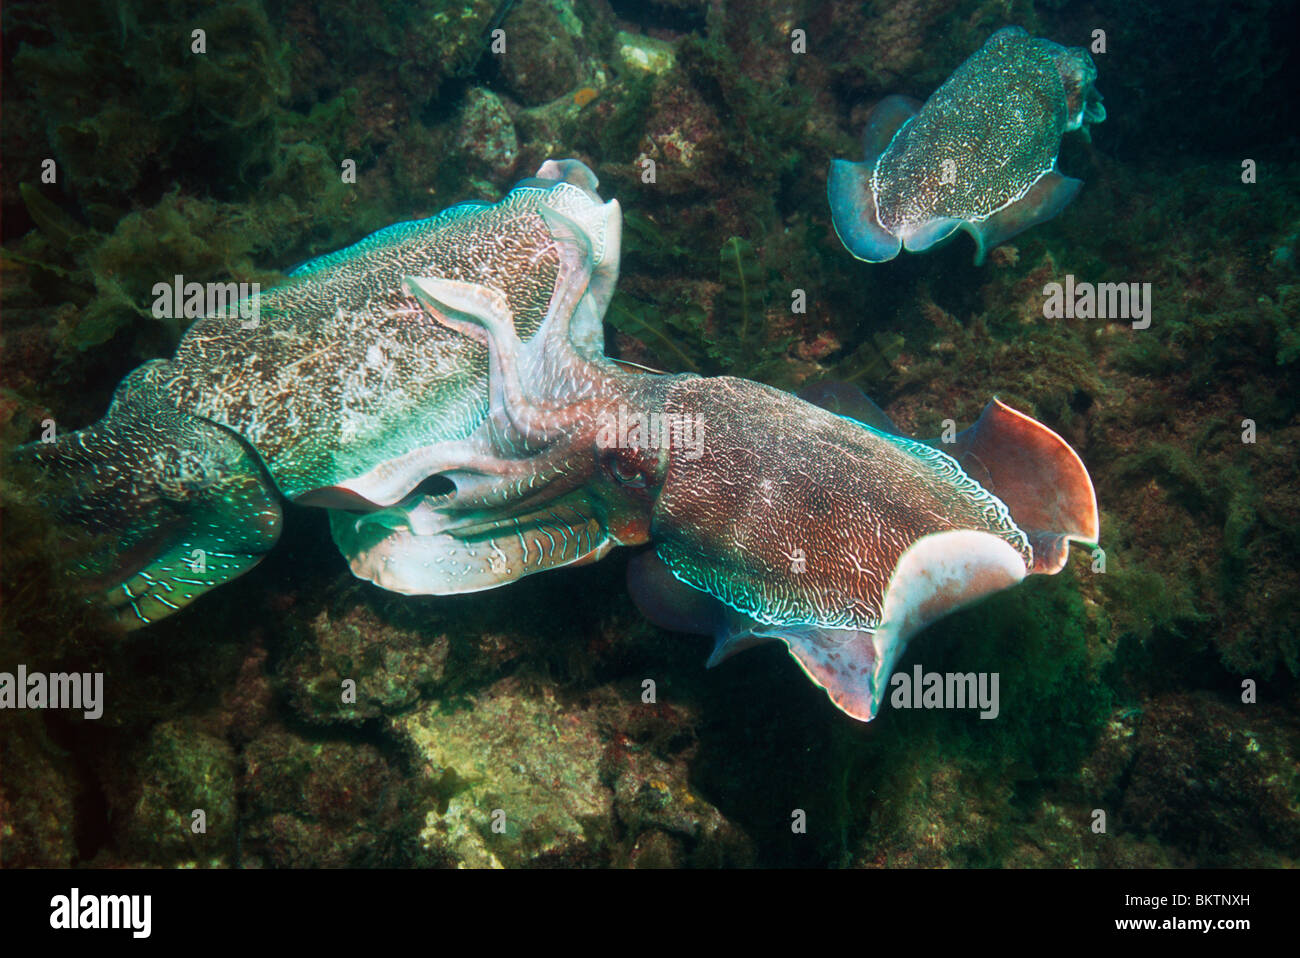 Giant cuttlefish (Sepia apama) males fighting over an egg-laying female (swimming away on the right). Stock Photo